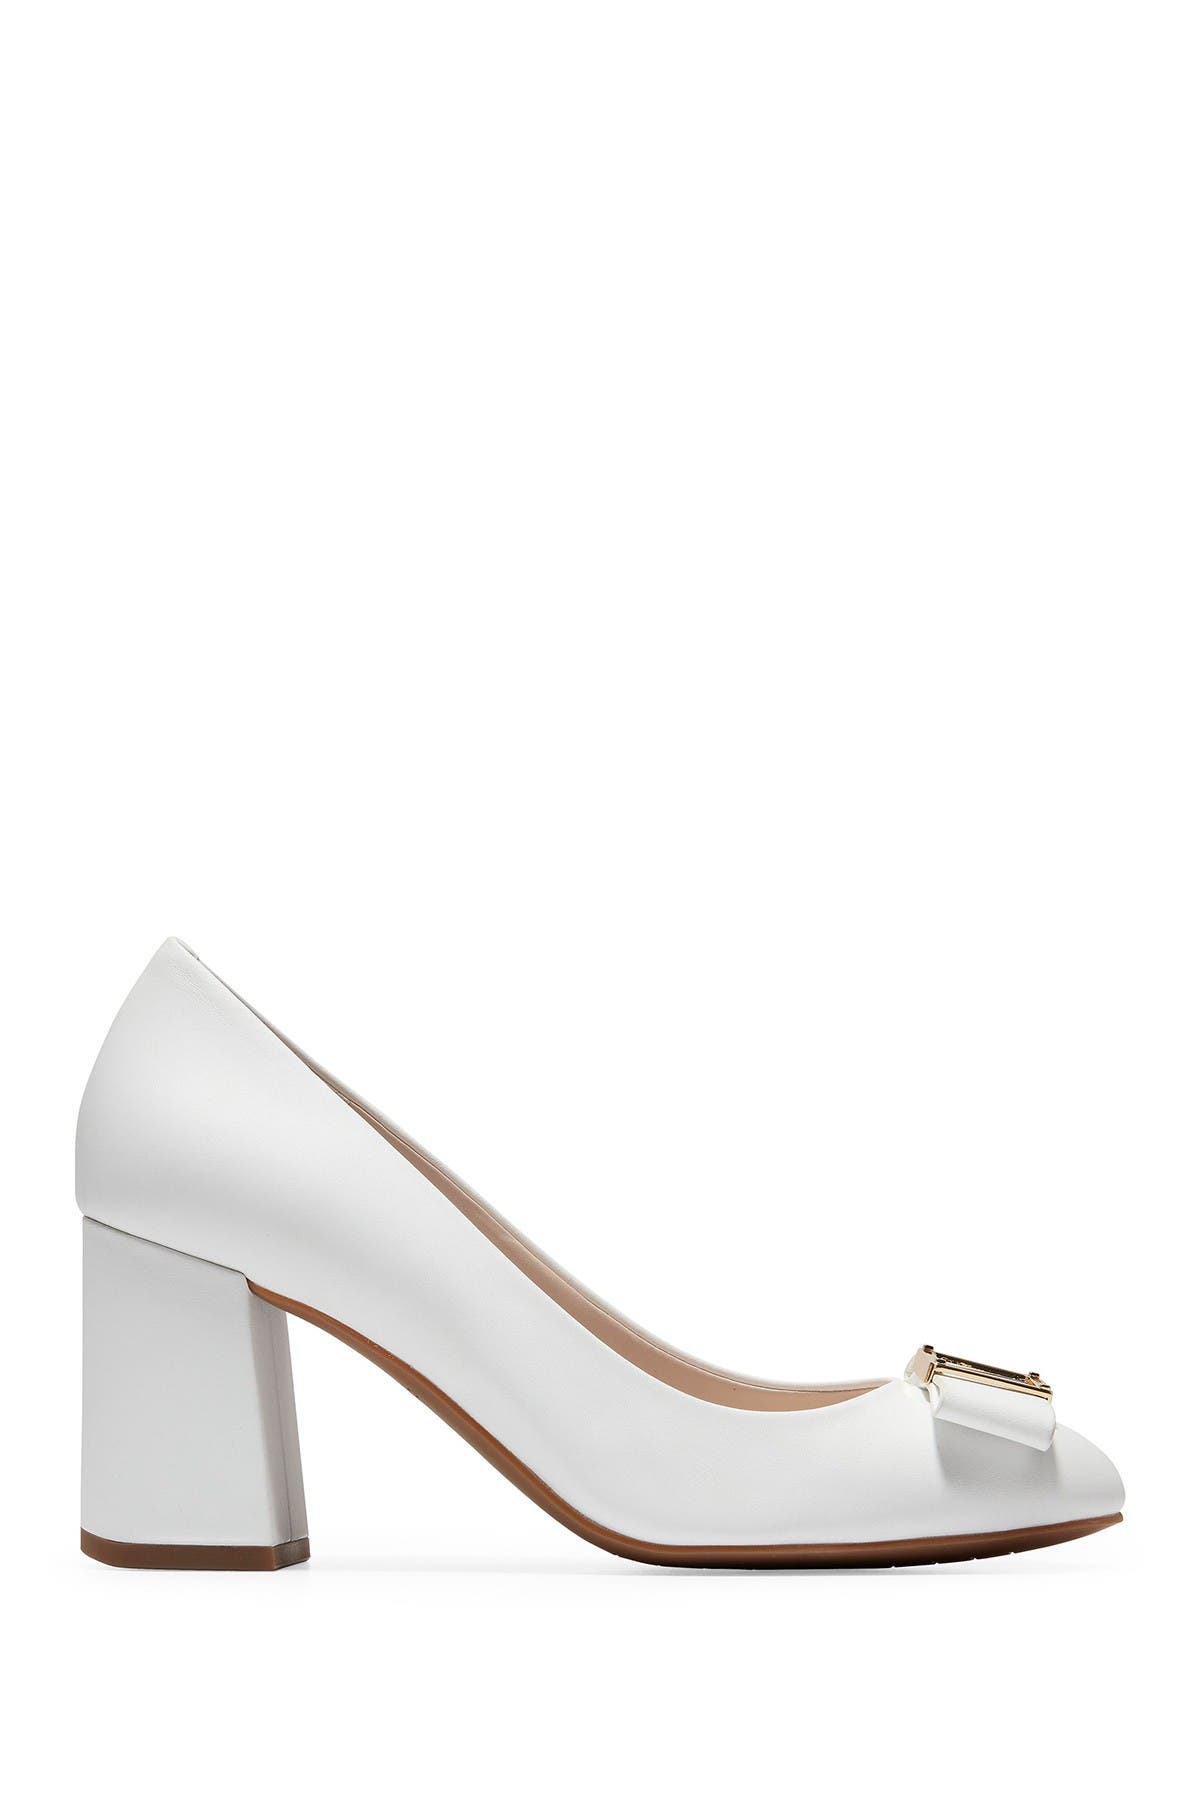 Cole Haan | Emory Grand Bow Pump 